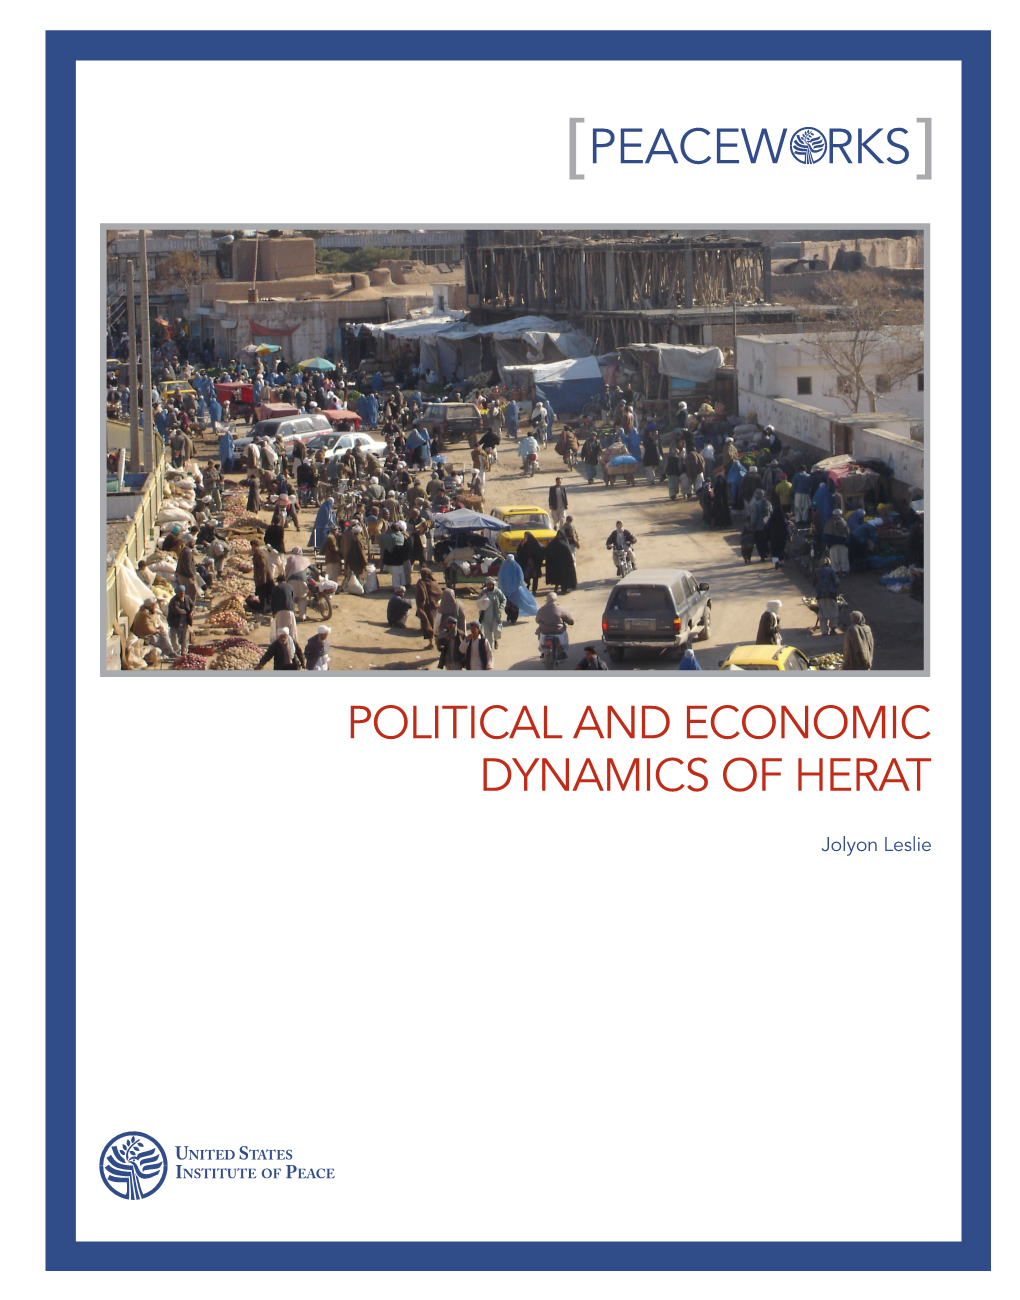 Political and Economic Dynamics of Herat